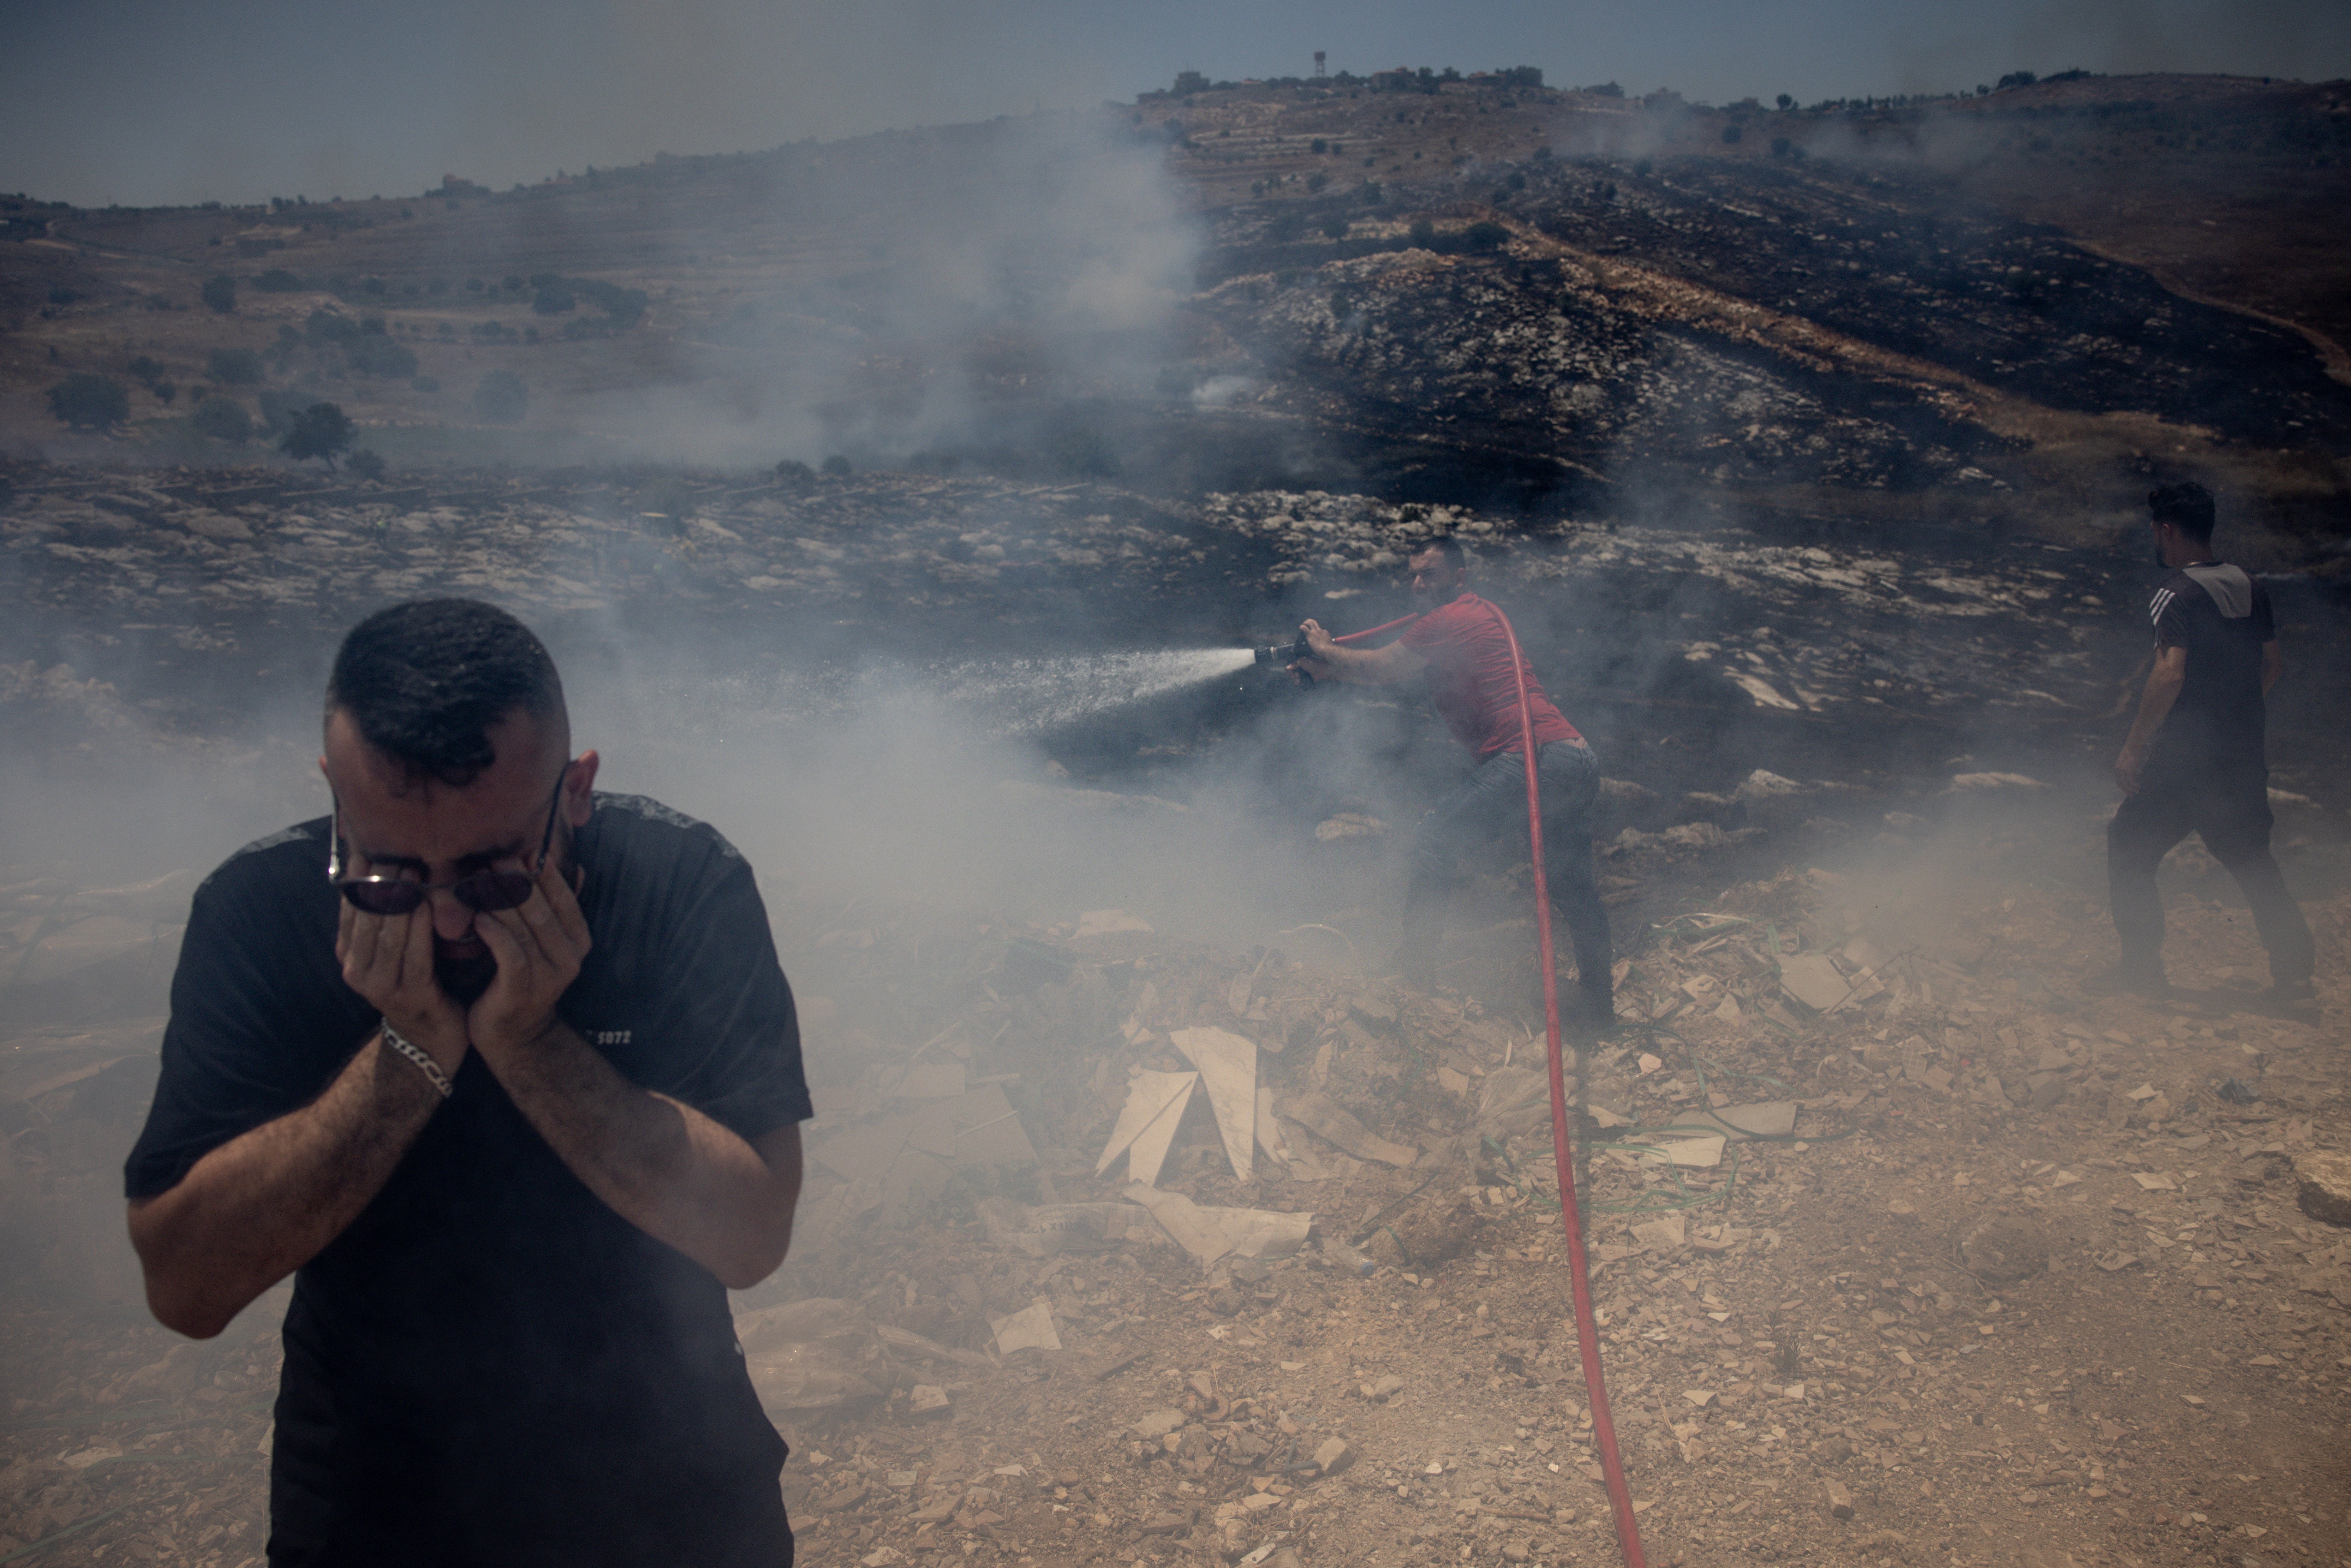 A man covers his eyes from smoke as civilians try to put out fires caused by several Israeli raids that hit targets next to the town's main road in Bint Jbeil, Lebanon.